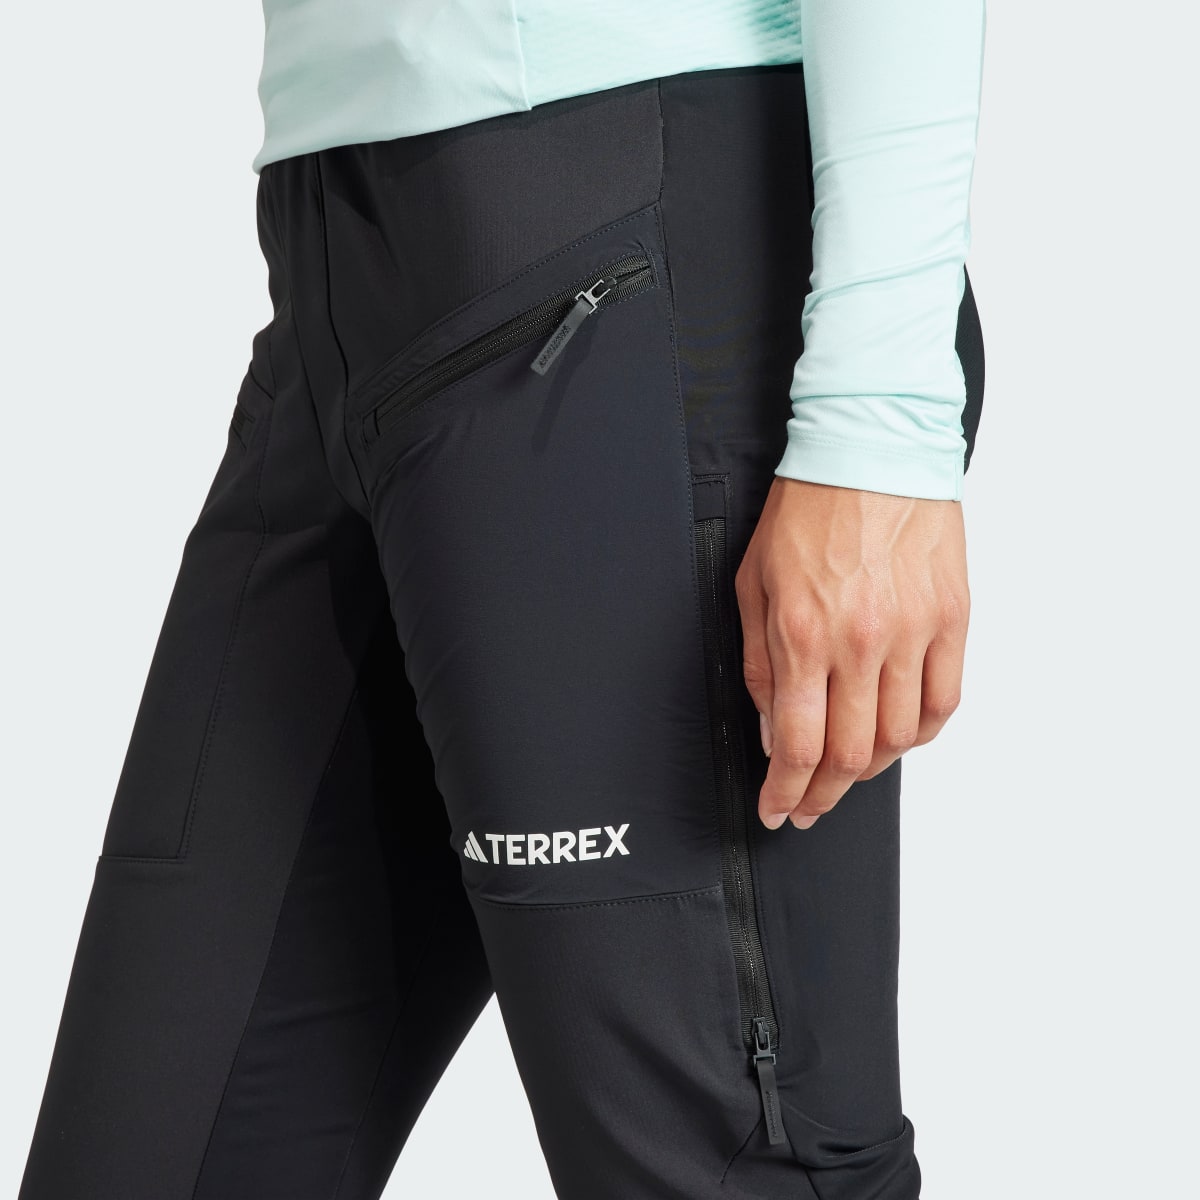 Adidas Terrex Xperior Fast Tracksuit Bottoms. 5